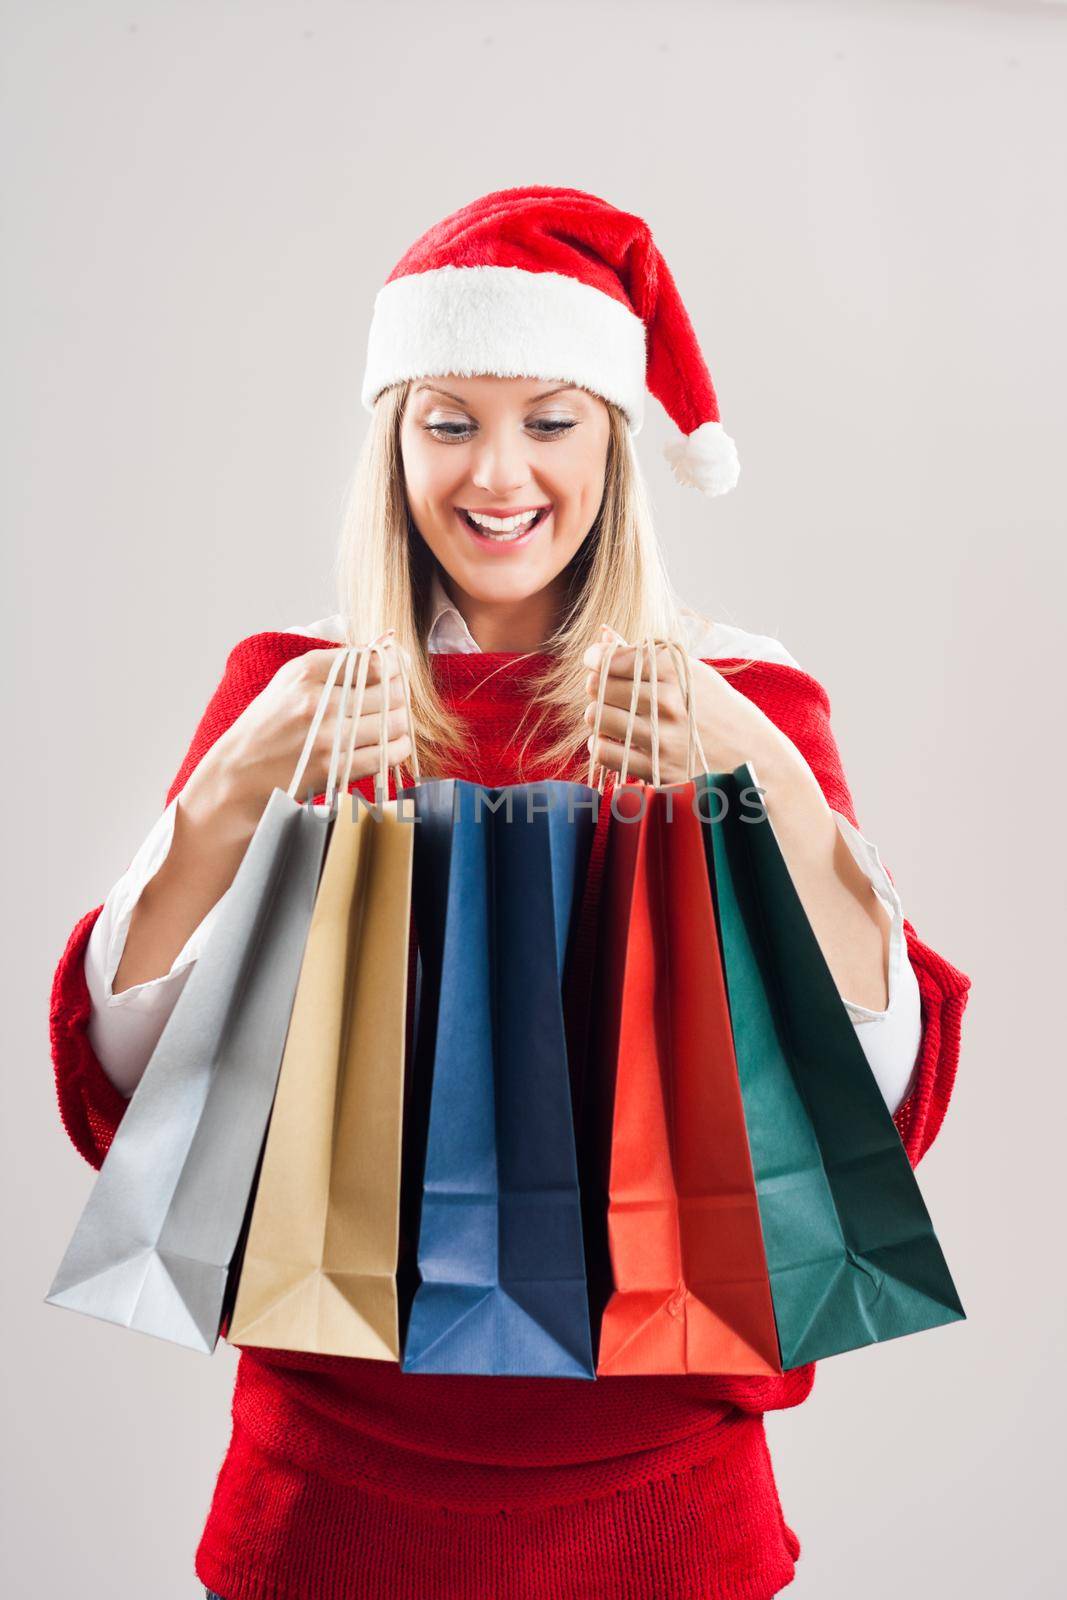 Image of beautiful young woman with Santa hat holding shopping bags.